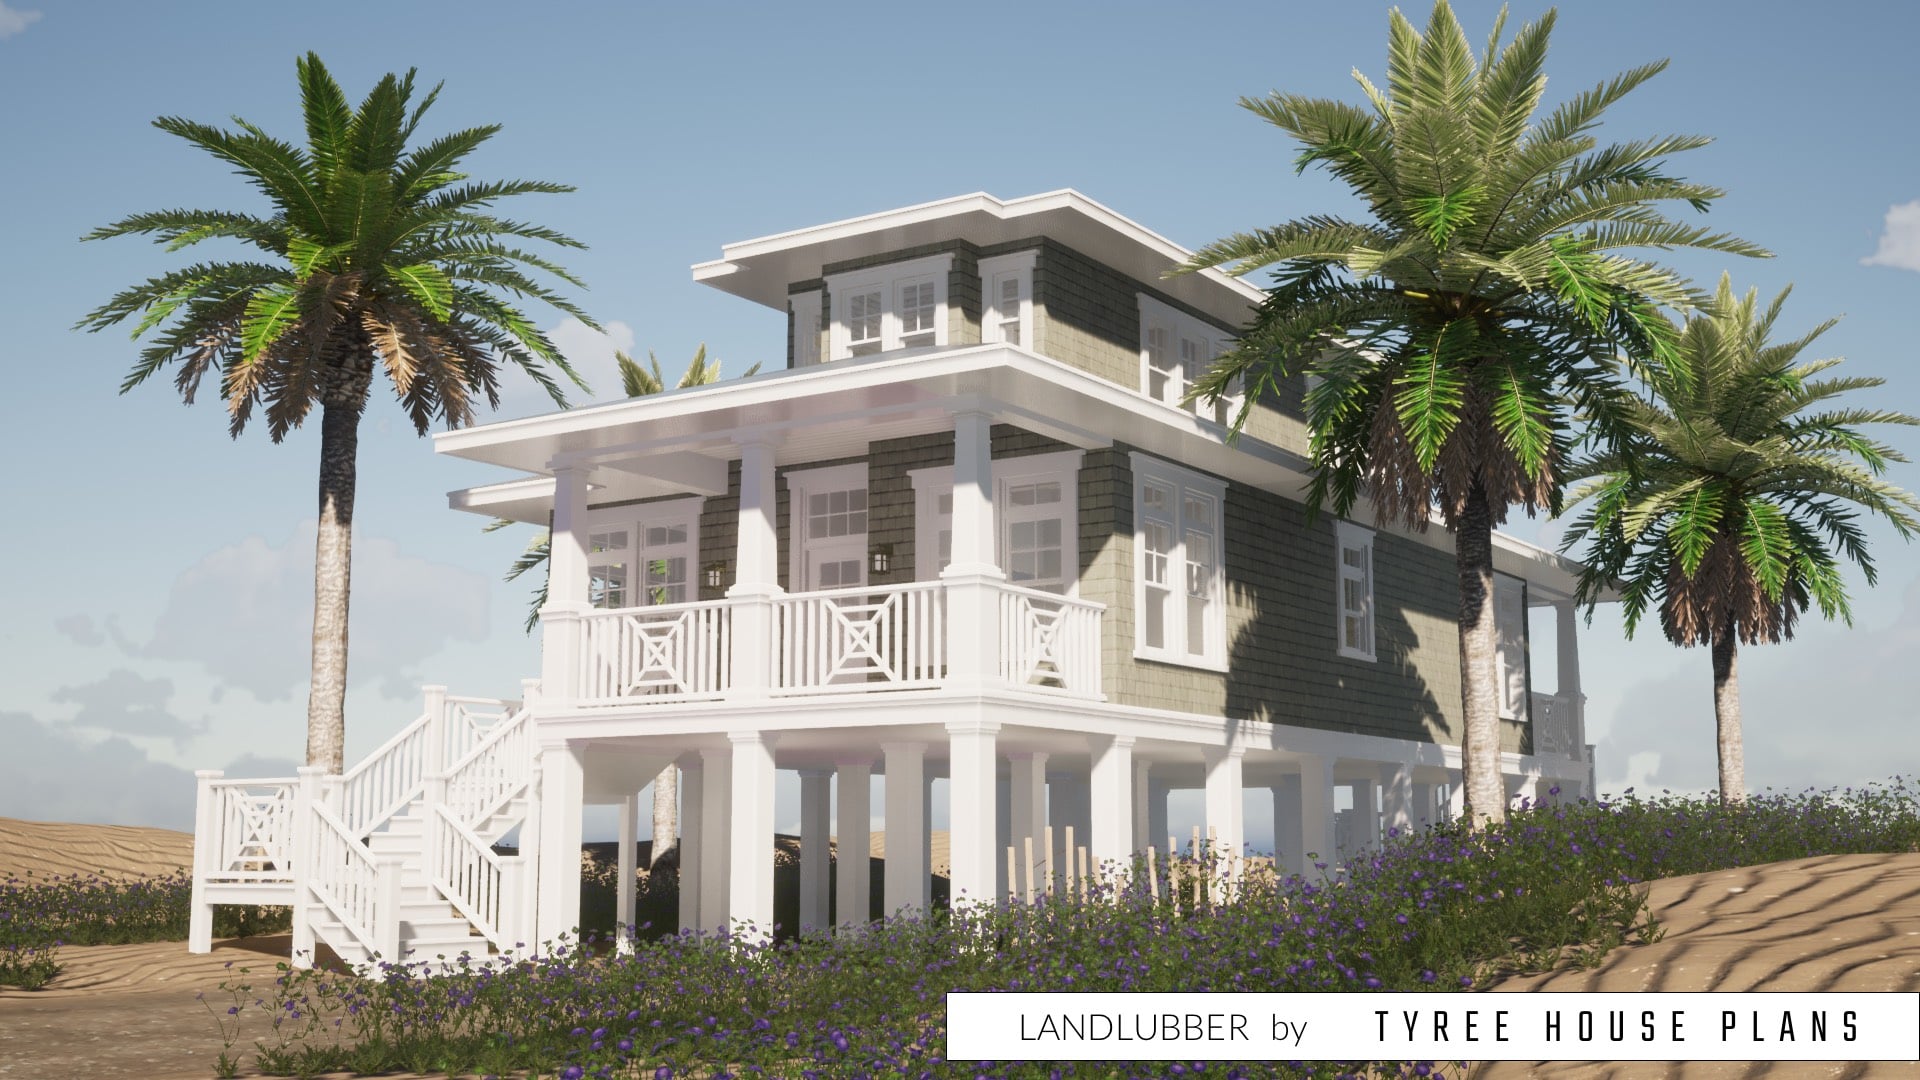 Landlubber by Tyree House Plans.